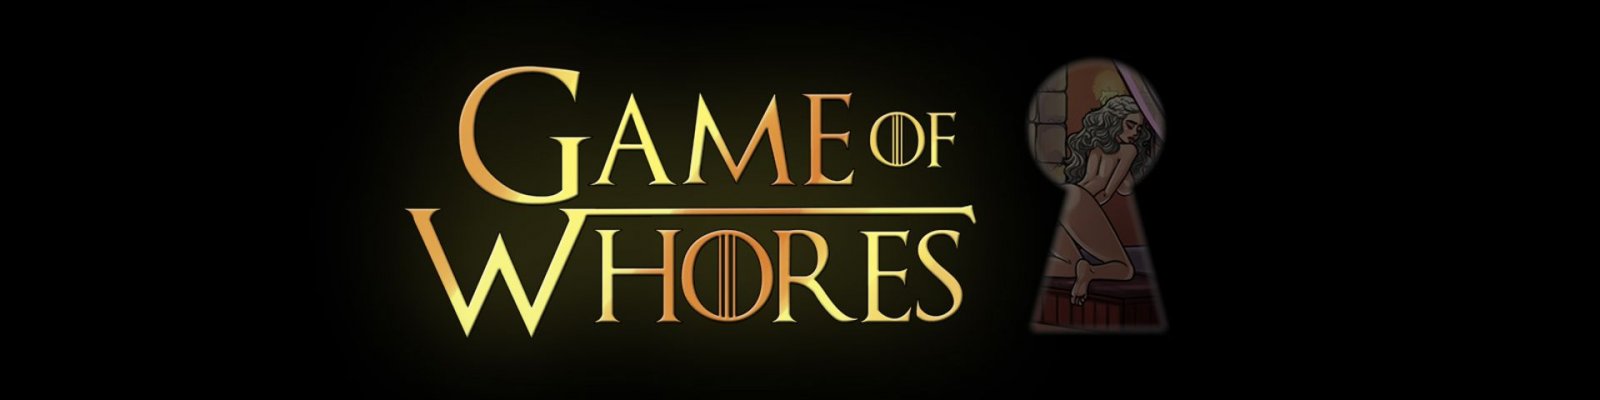 Game of Whores v0.17 by MANITU Games eng